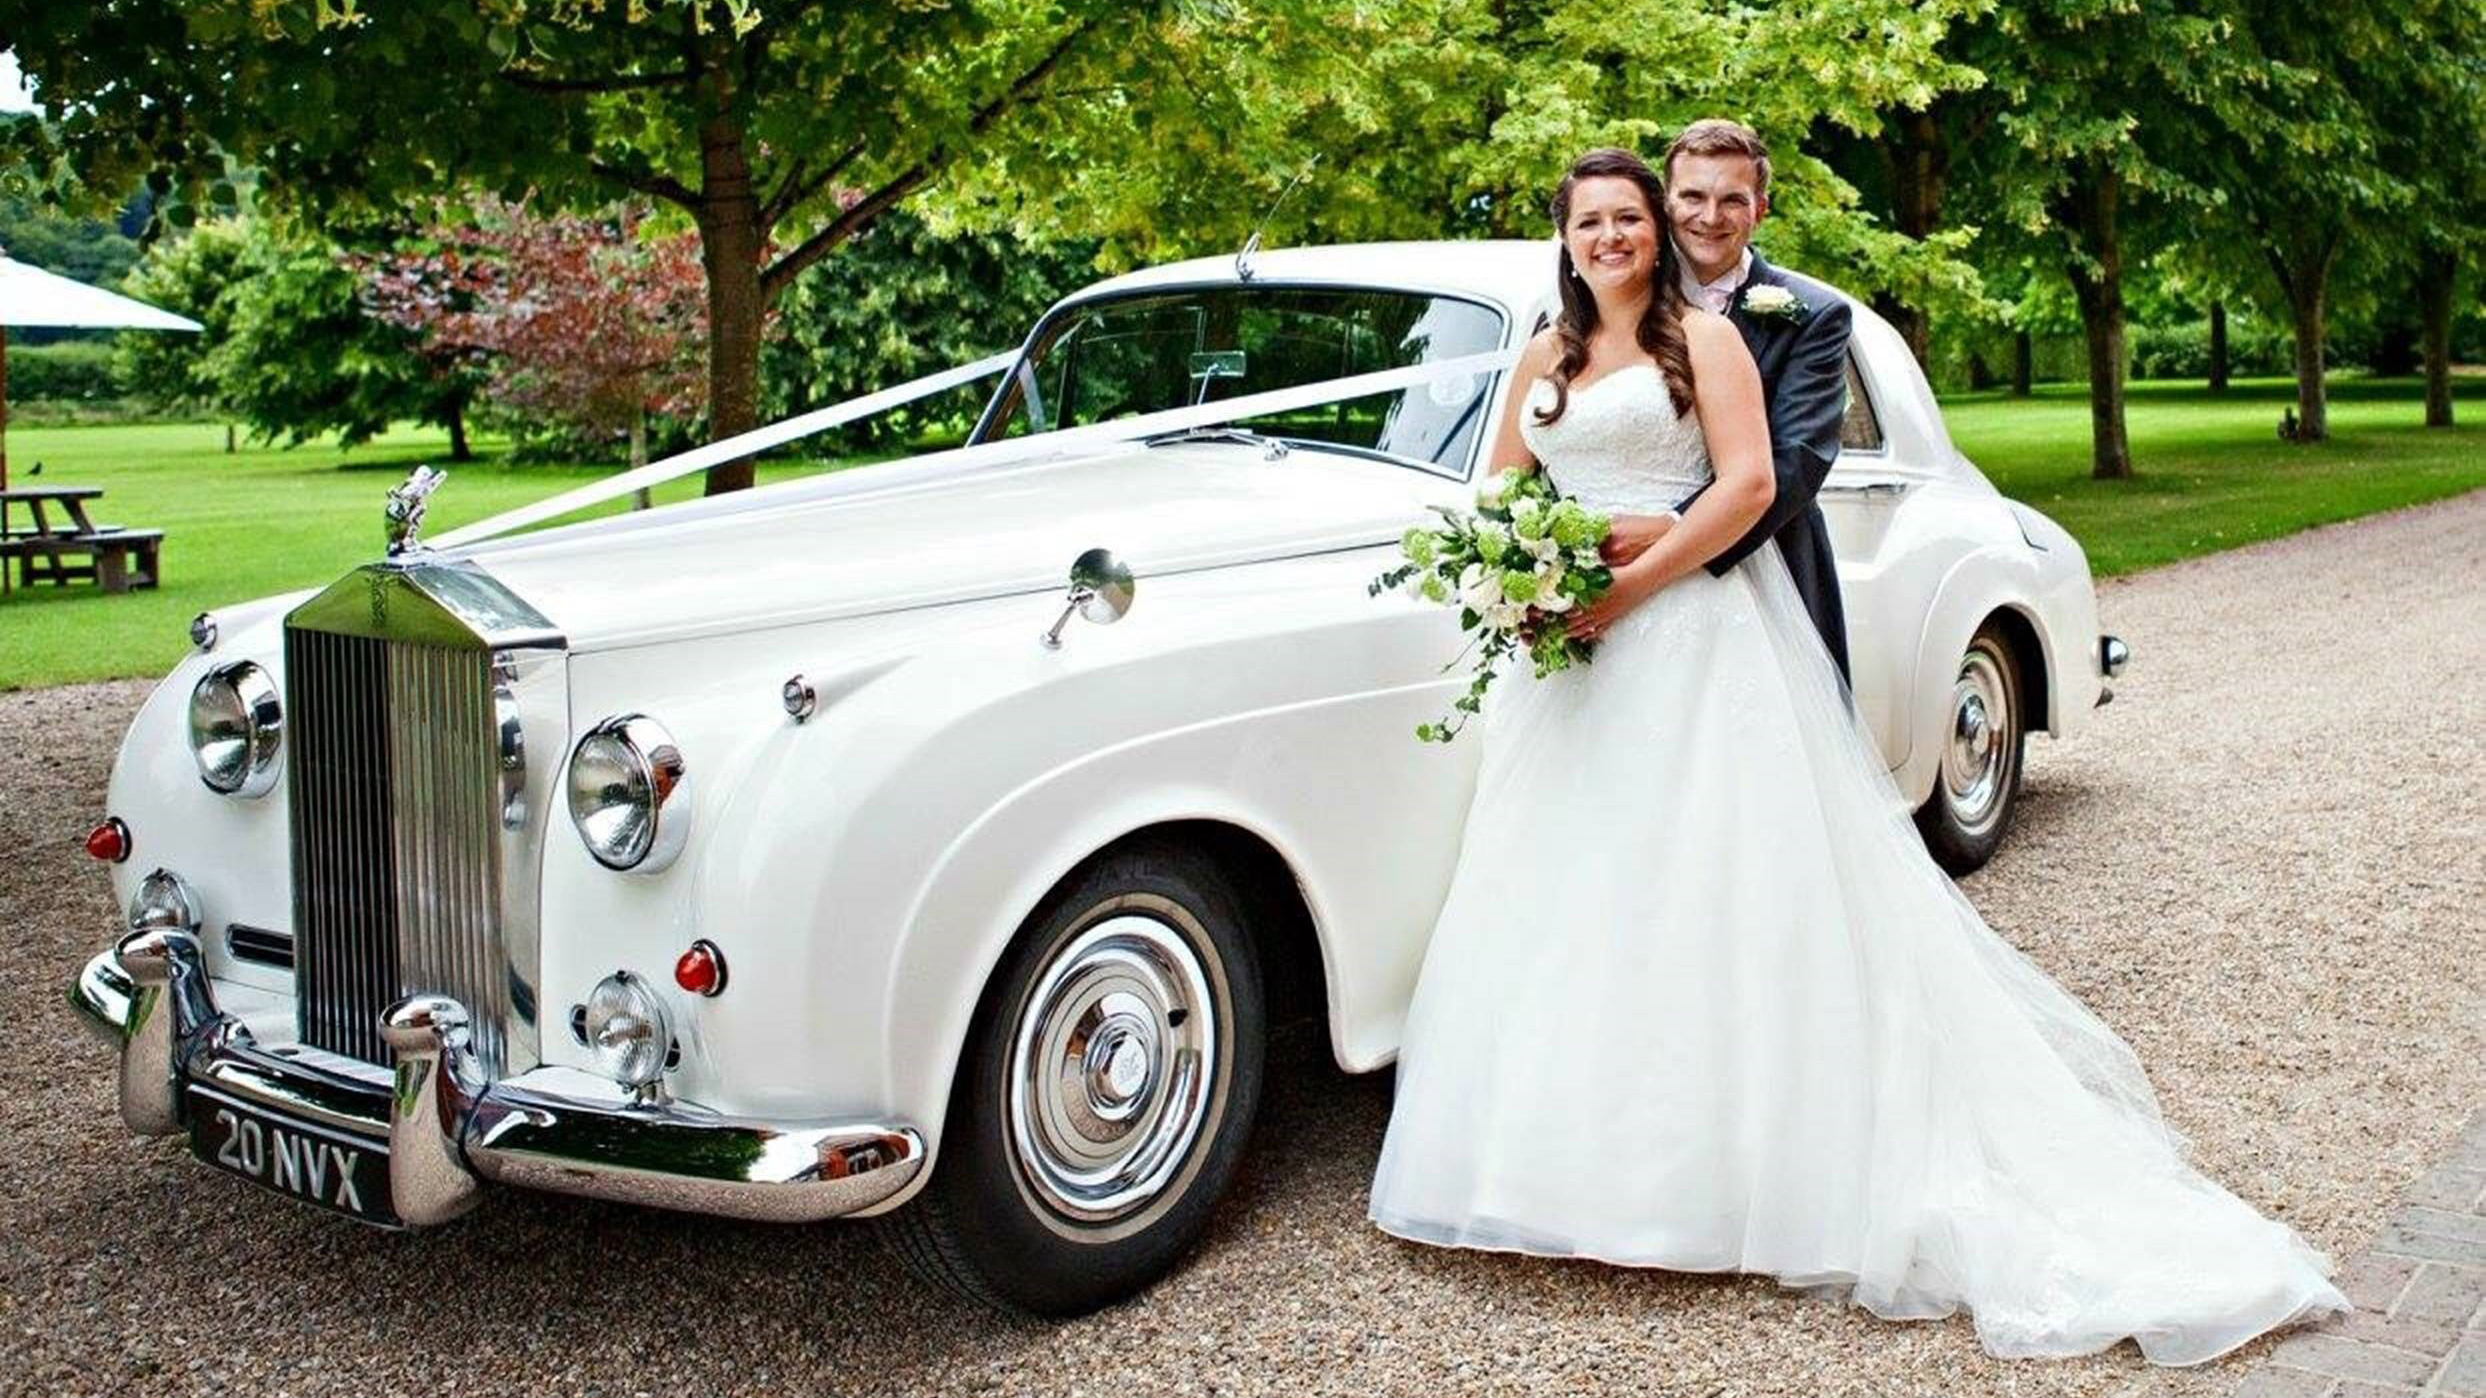 White Rolls-Royce Silver cloud decorated with ivory ribbons parked in the entrance of a wedding venue in Barton-le-Clay. Bride and Groom are standing by the vehicle. Groom is holding his Bride in his arms while she holds her bridal bouquet.